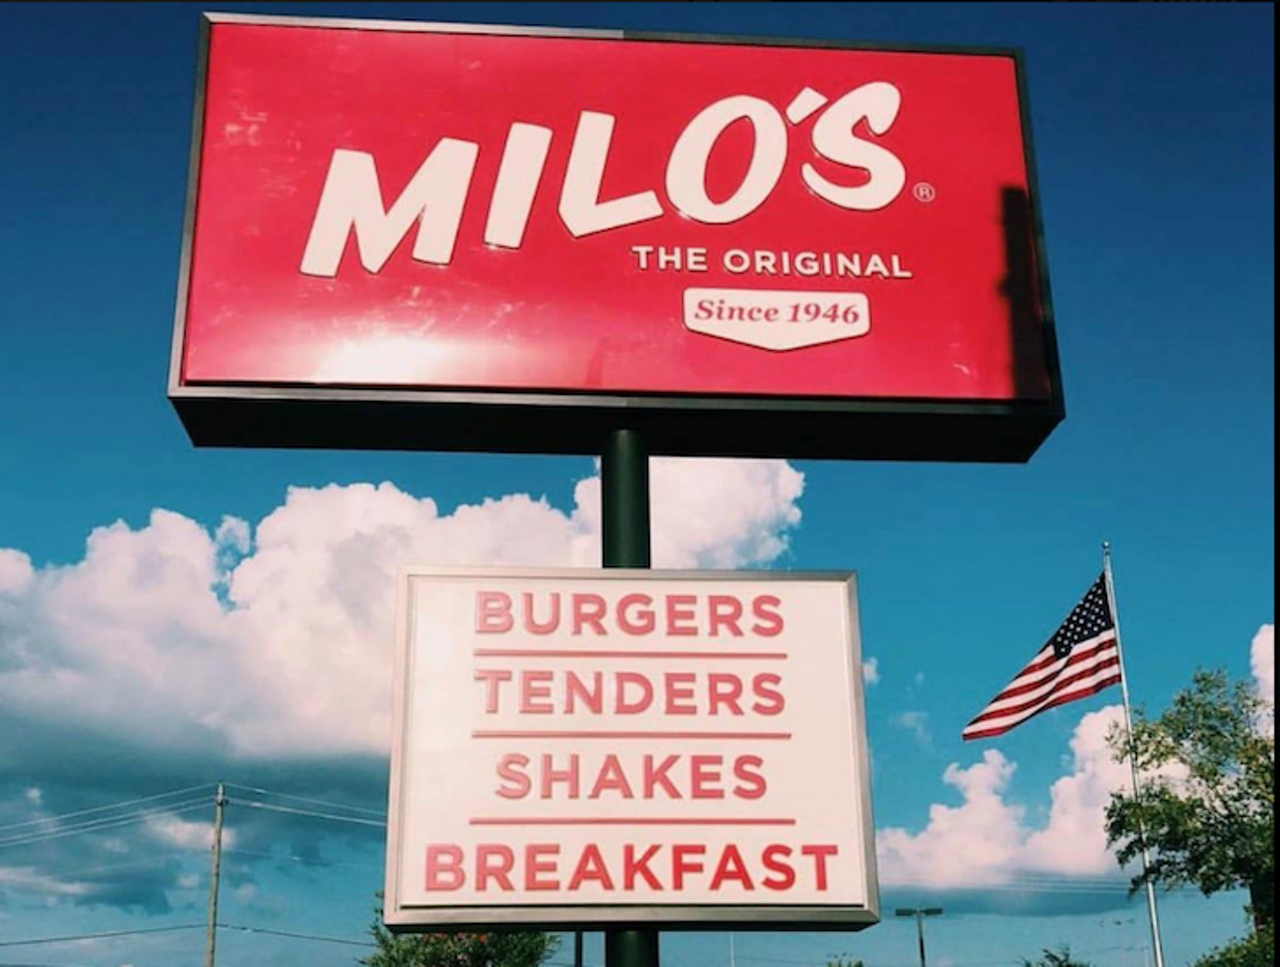 Milo&#146;s Hamburgers 
Milo&#146;s claim to fame? Its fan-favorite secret sauce, handspun milkshakes and burgers with &#147;a little something extra.&#148; Milo&#146;s started by slinging patties for the toughest-of-the-tough in Birmingham &#151; steel workers. In order to fill these macho-men&#146;s ravenous appetites and thank them for their loyal business, the growing chain started slapping extra chunks of patty onto its saucy burgers. Now with nearly 20 locations in Alabama, we&#146;re asking for &#147;a little something extra&#148; to come our way.
Photo via Milo's Original Burger Shop/Facebook